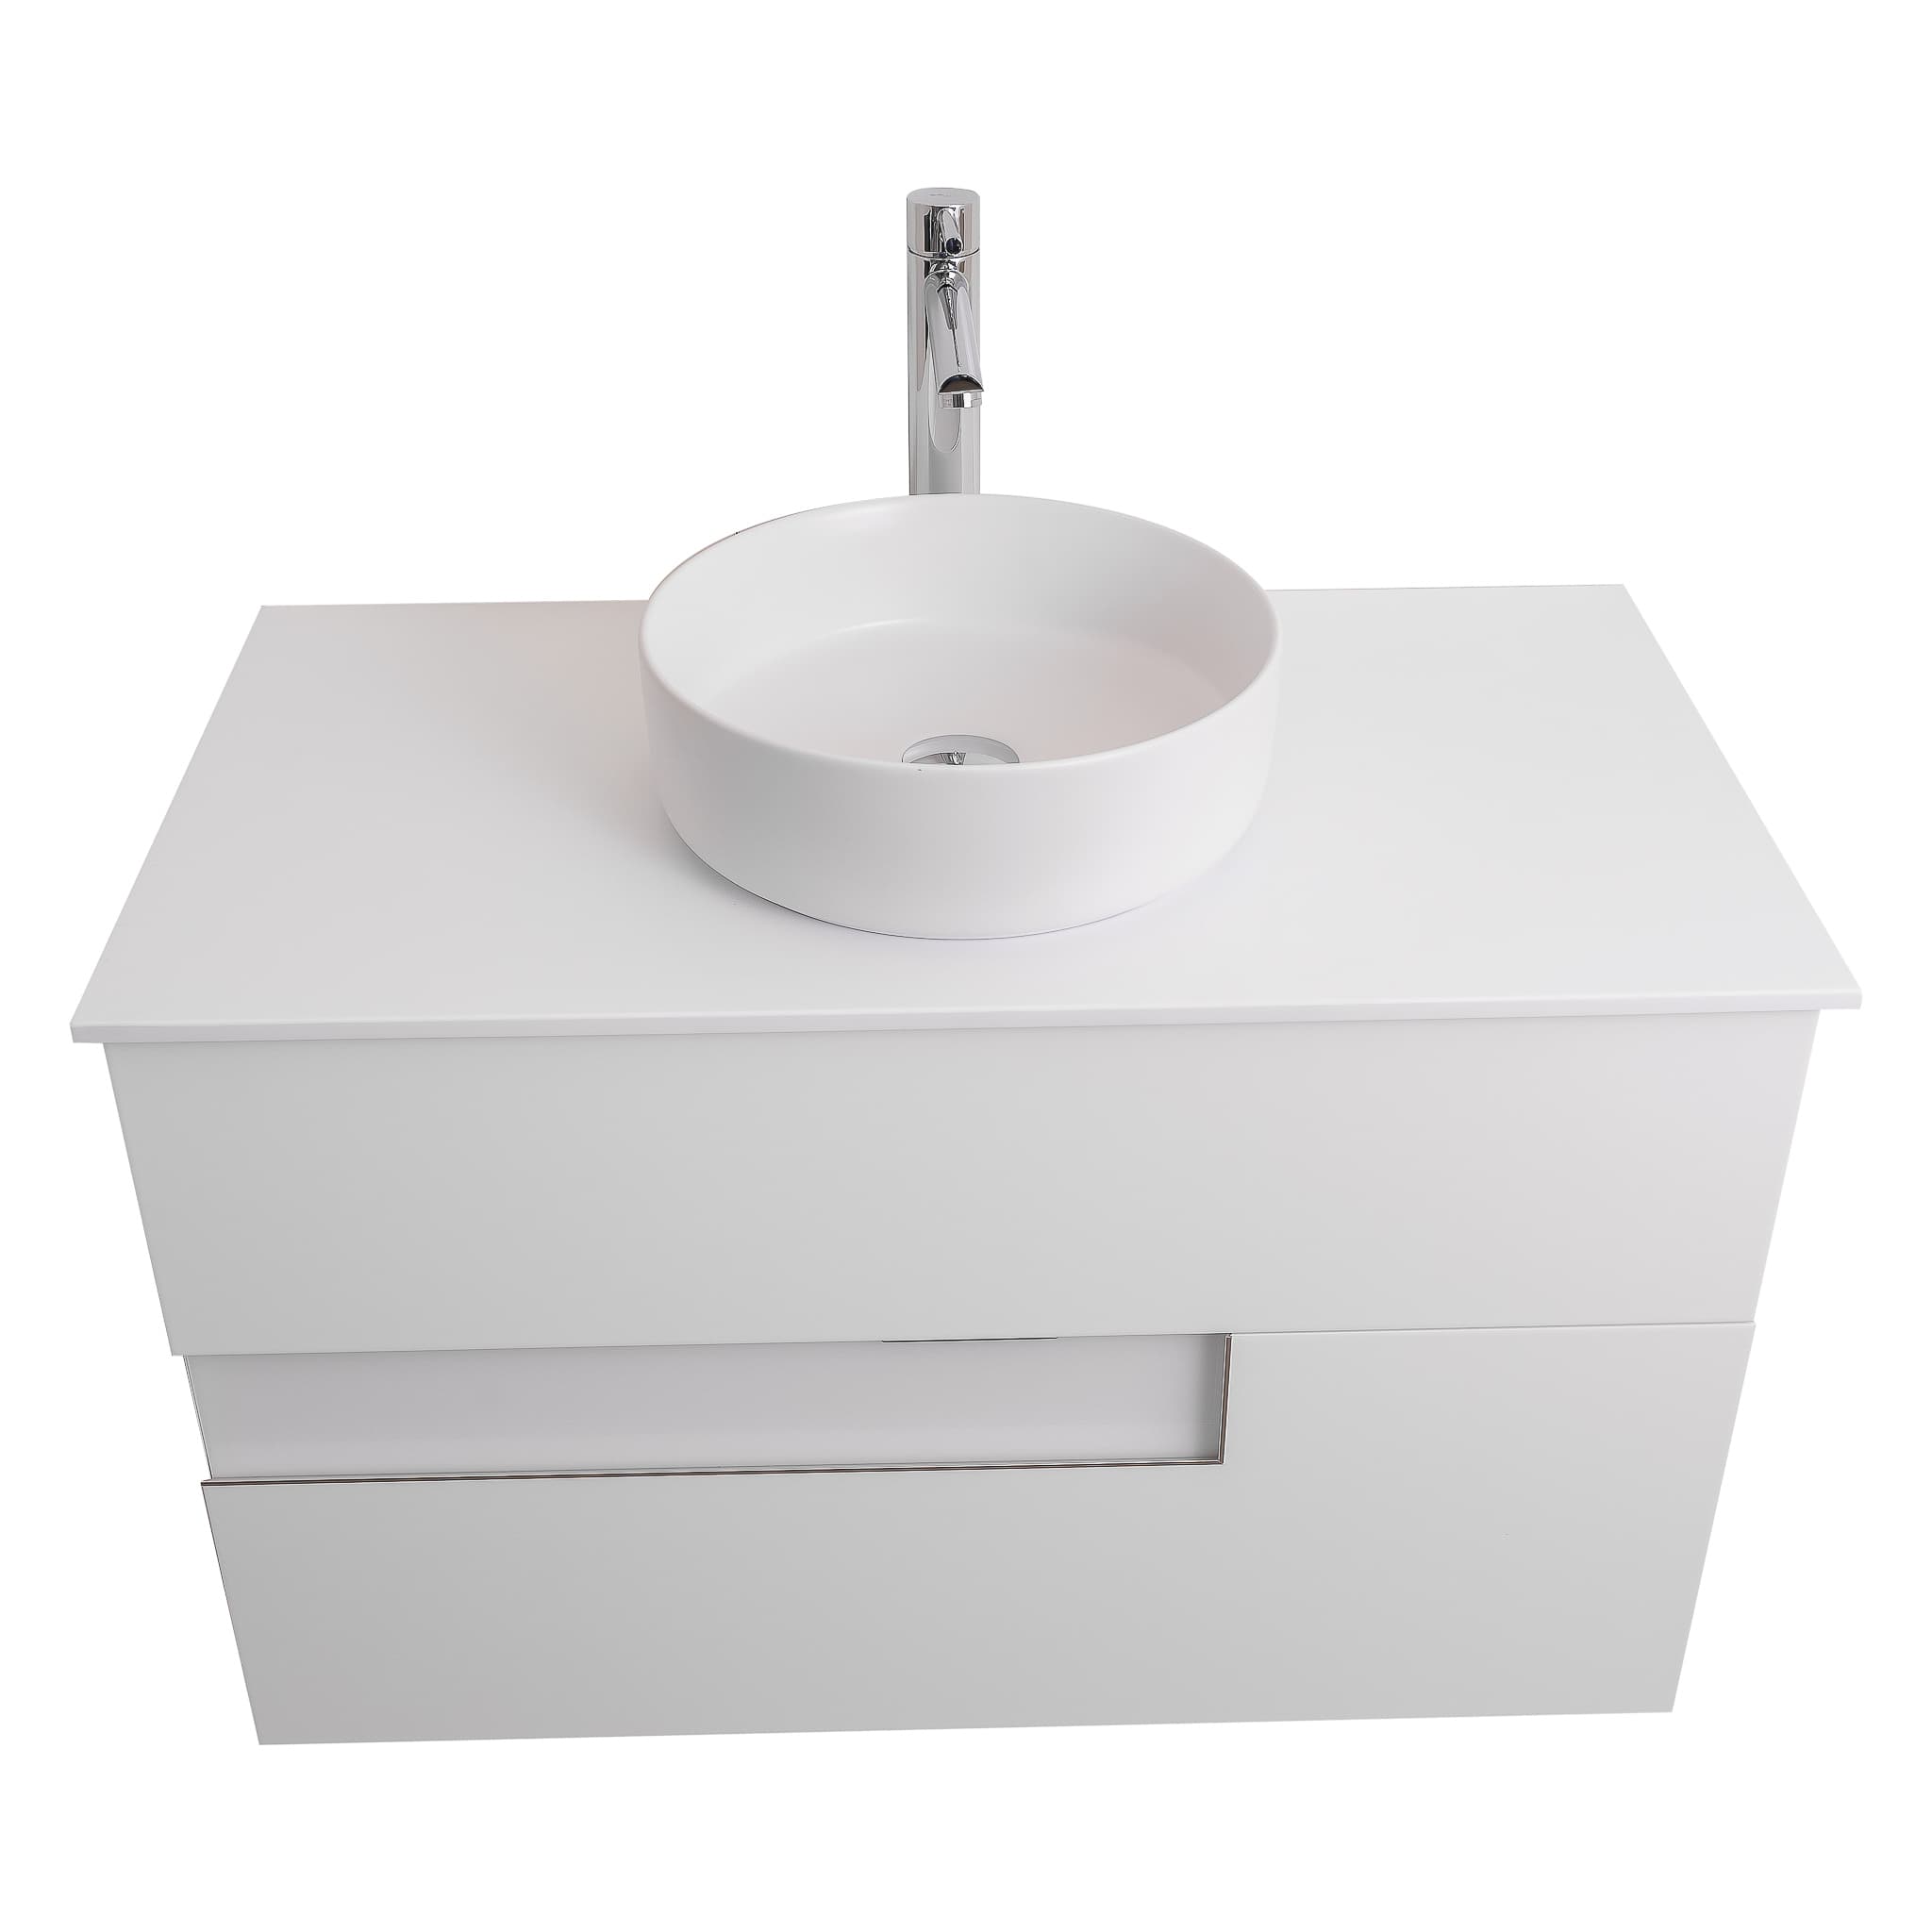 Vision 39.5 White High Gloss Cabinet, Ares White Top And Ares White Ceramic Basin, Wall Mounted Modern Vanity Set